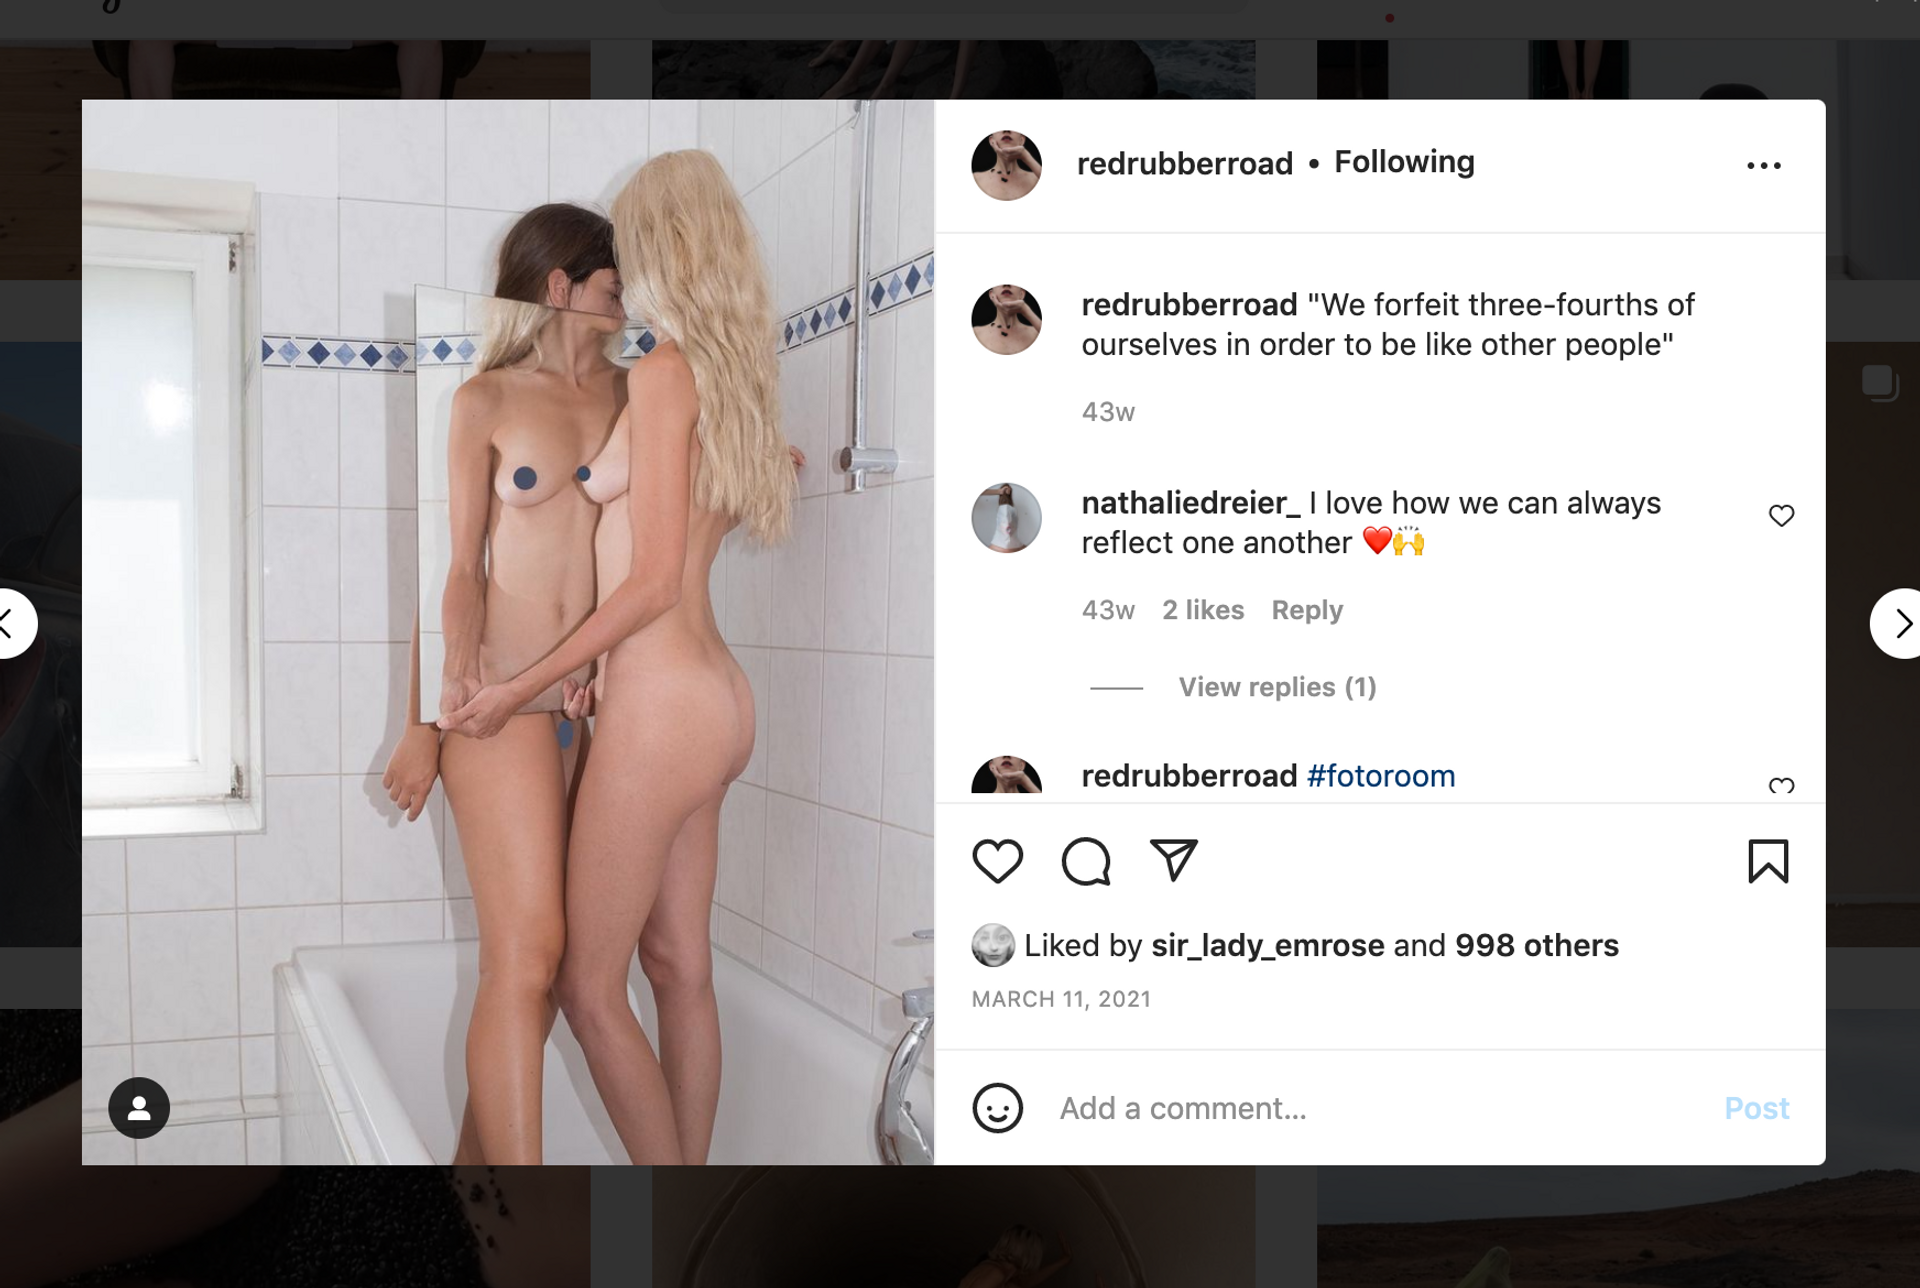 A self-censored Instagram post by artist duo Red Rubber Road (AnaHell and Nathalie Dreier) Photo: @redrubberroad